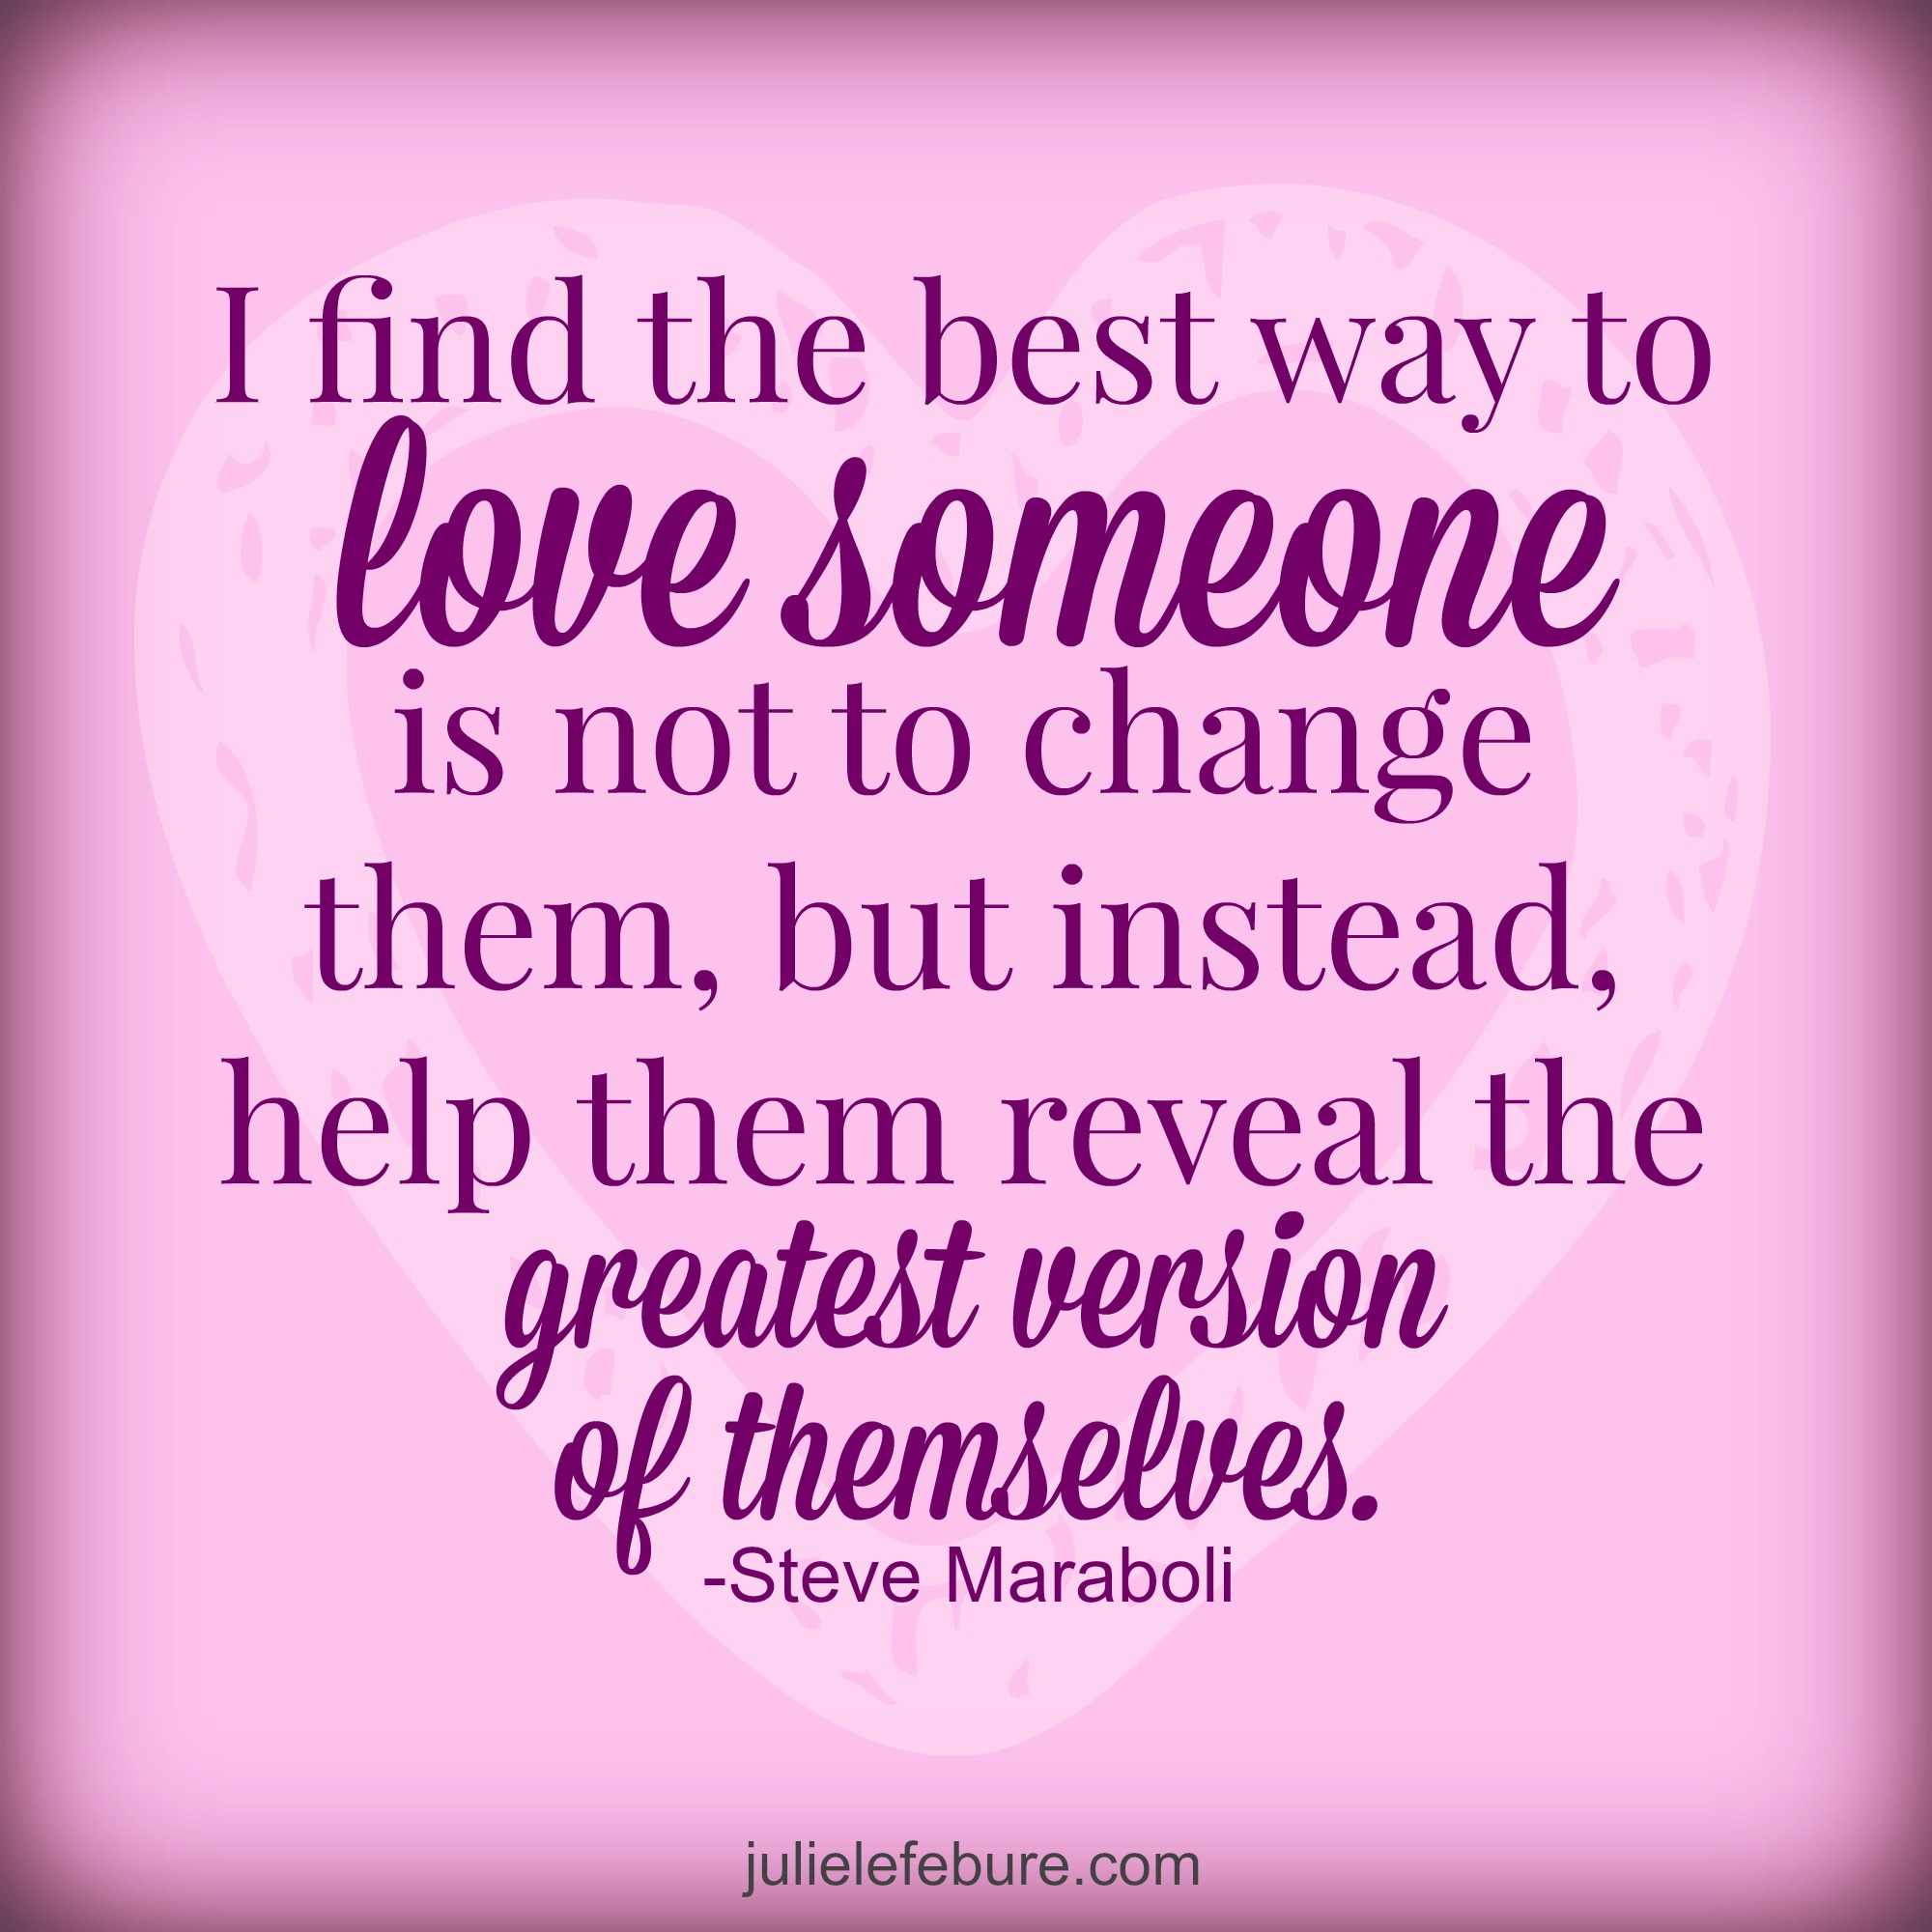 The Best Way To Love Someone - Julie Lefebure